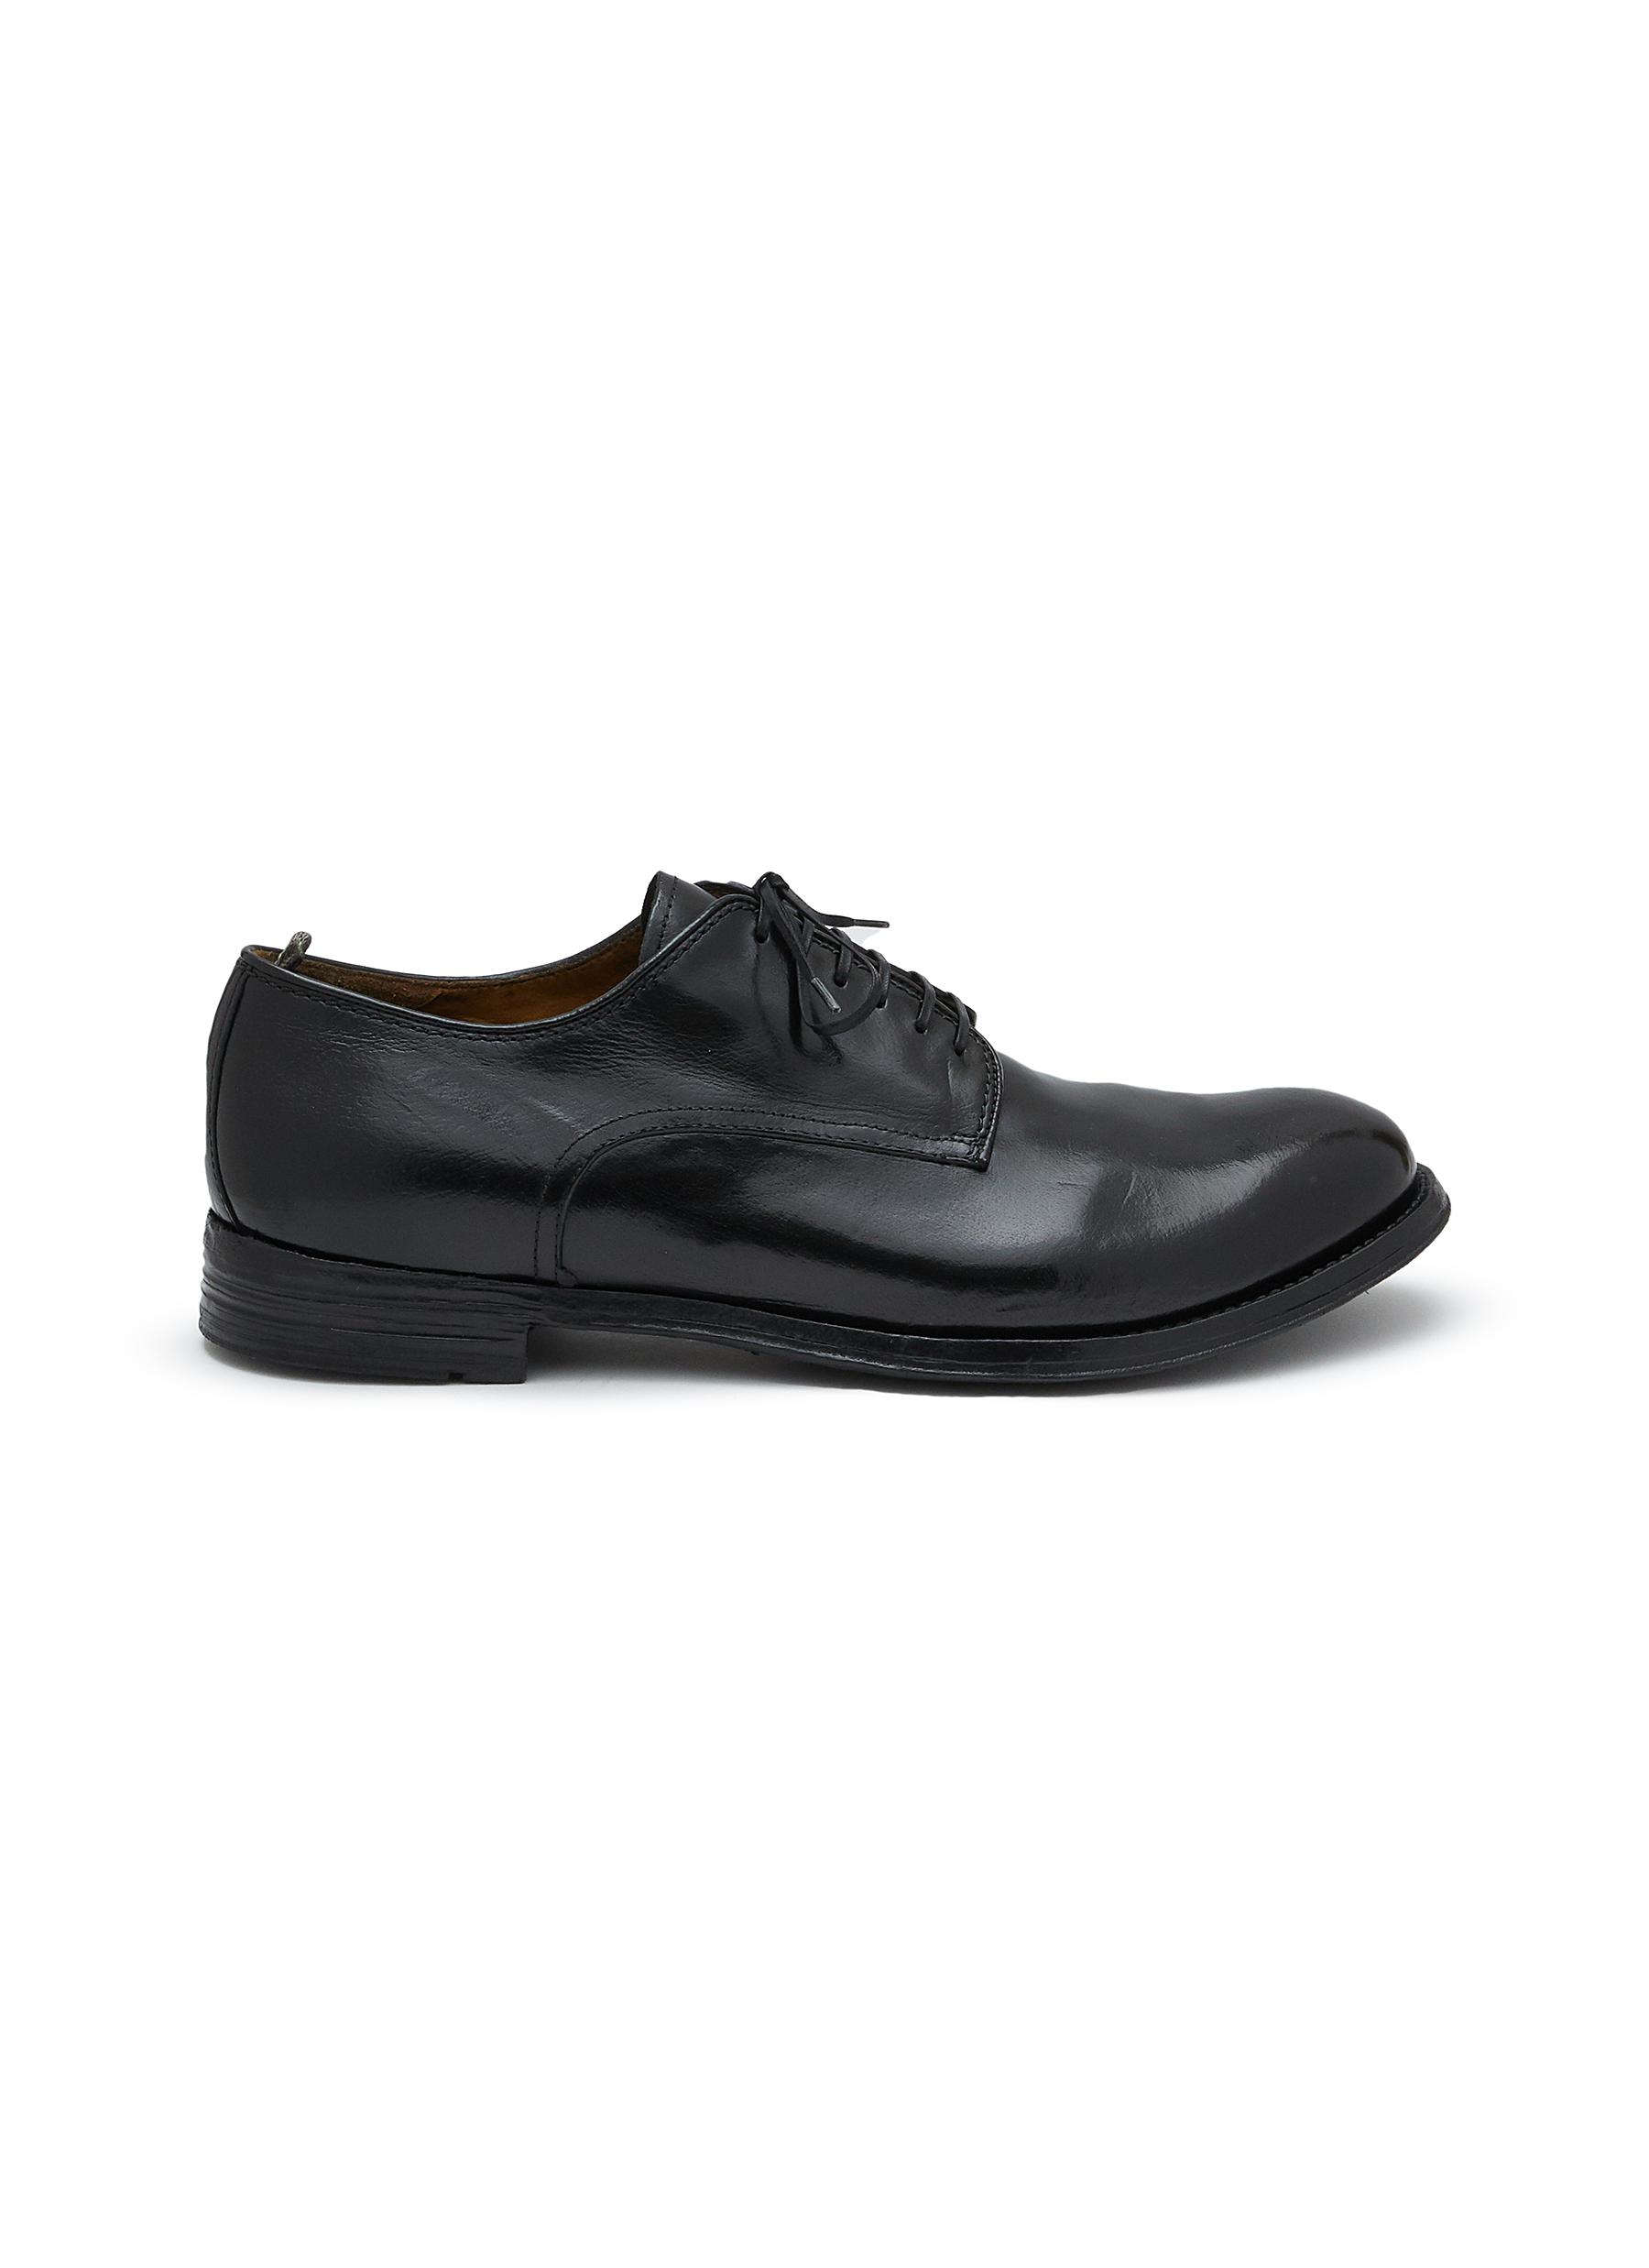 Anatomia 1212-Eyelet Leather Derby Shoes